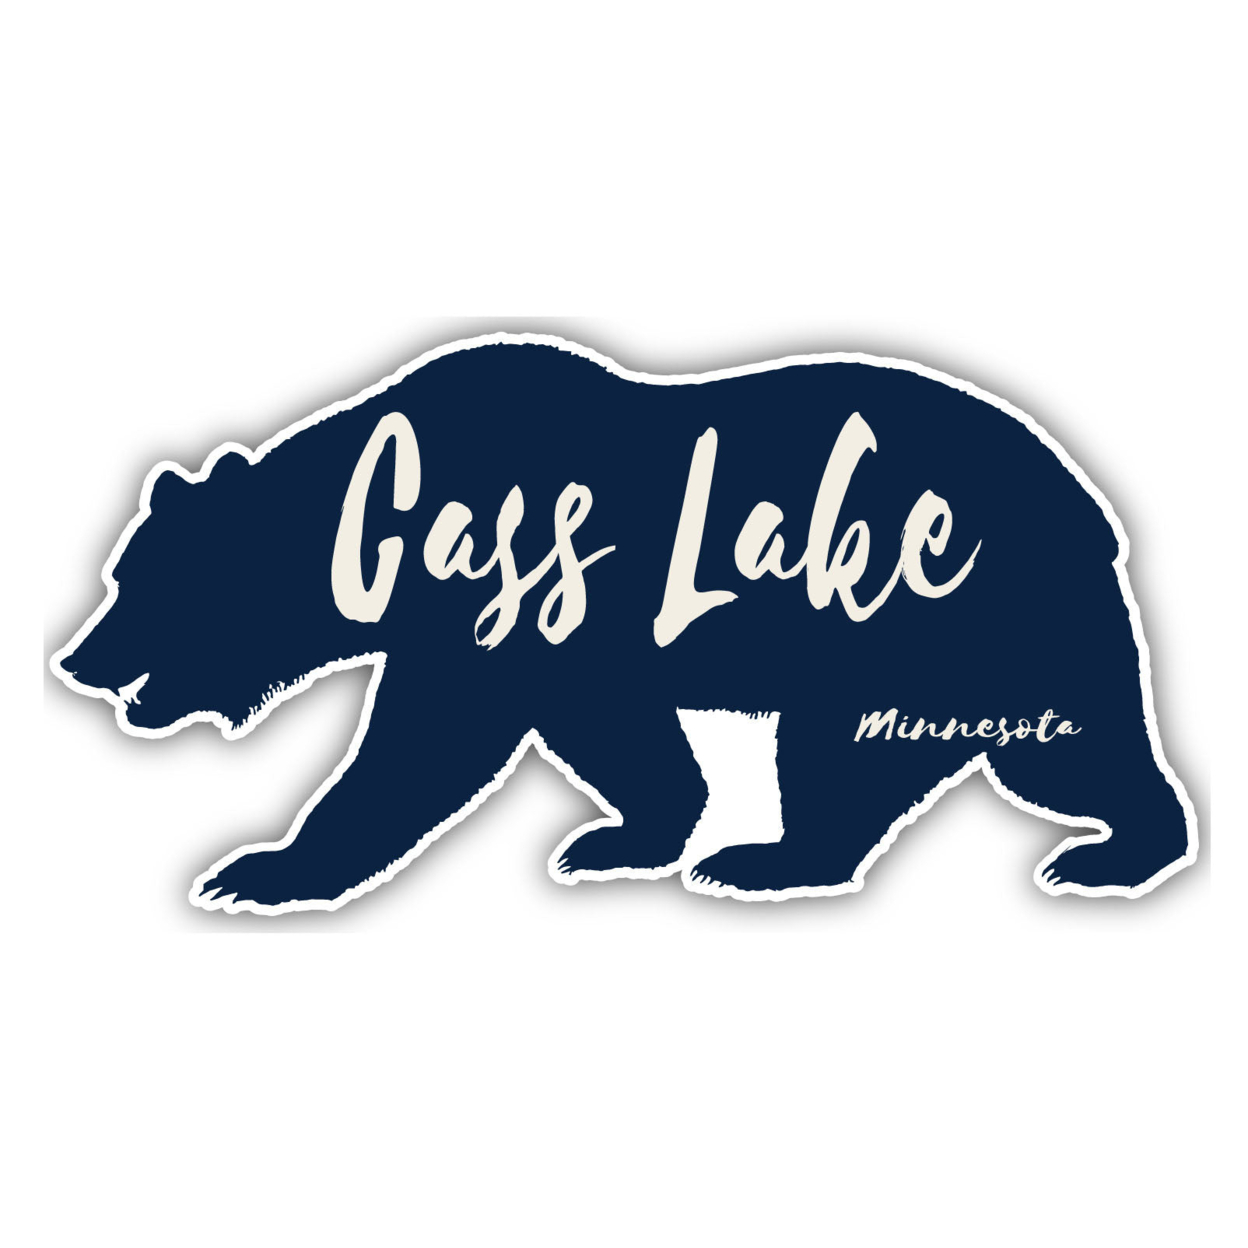 Cass Lake Minnesota Souvenir Decorative Stickers (Choose Theme And Size) - 4-Pack, 6-Inch, Tent